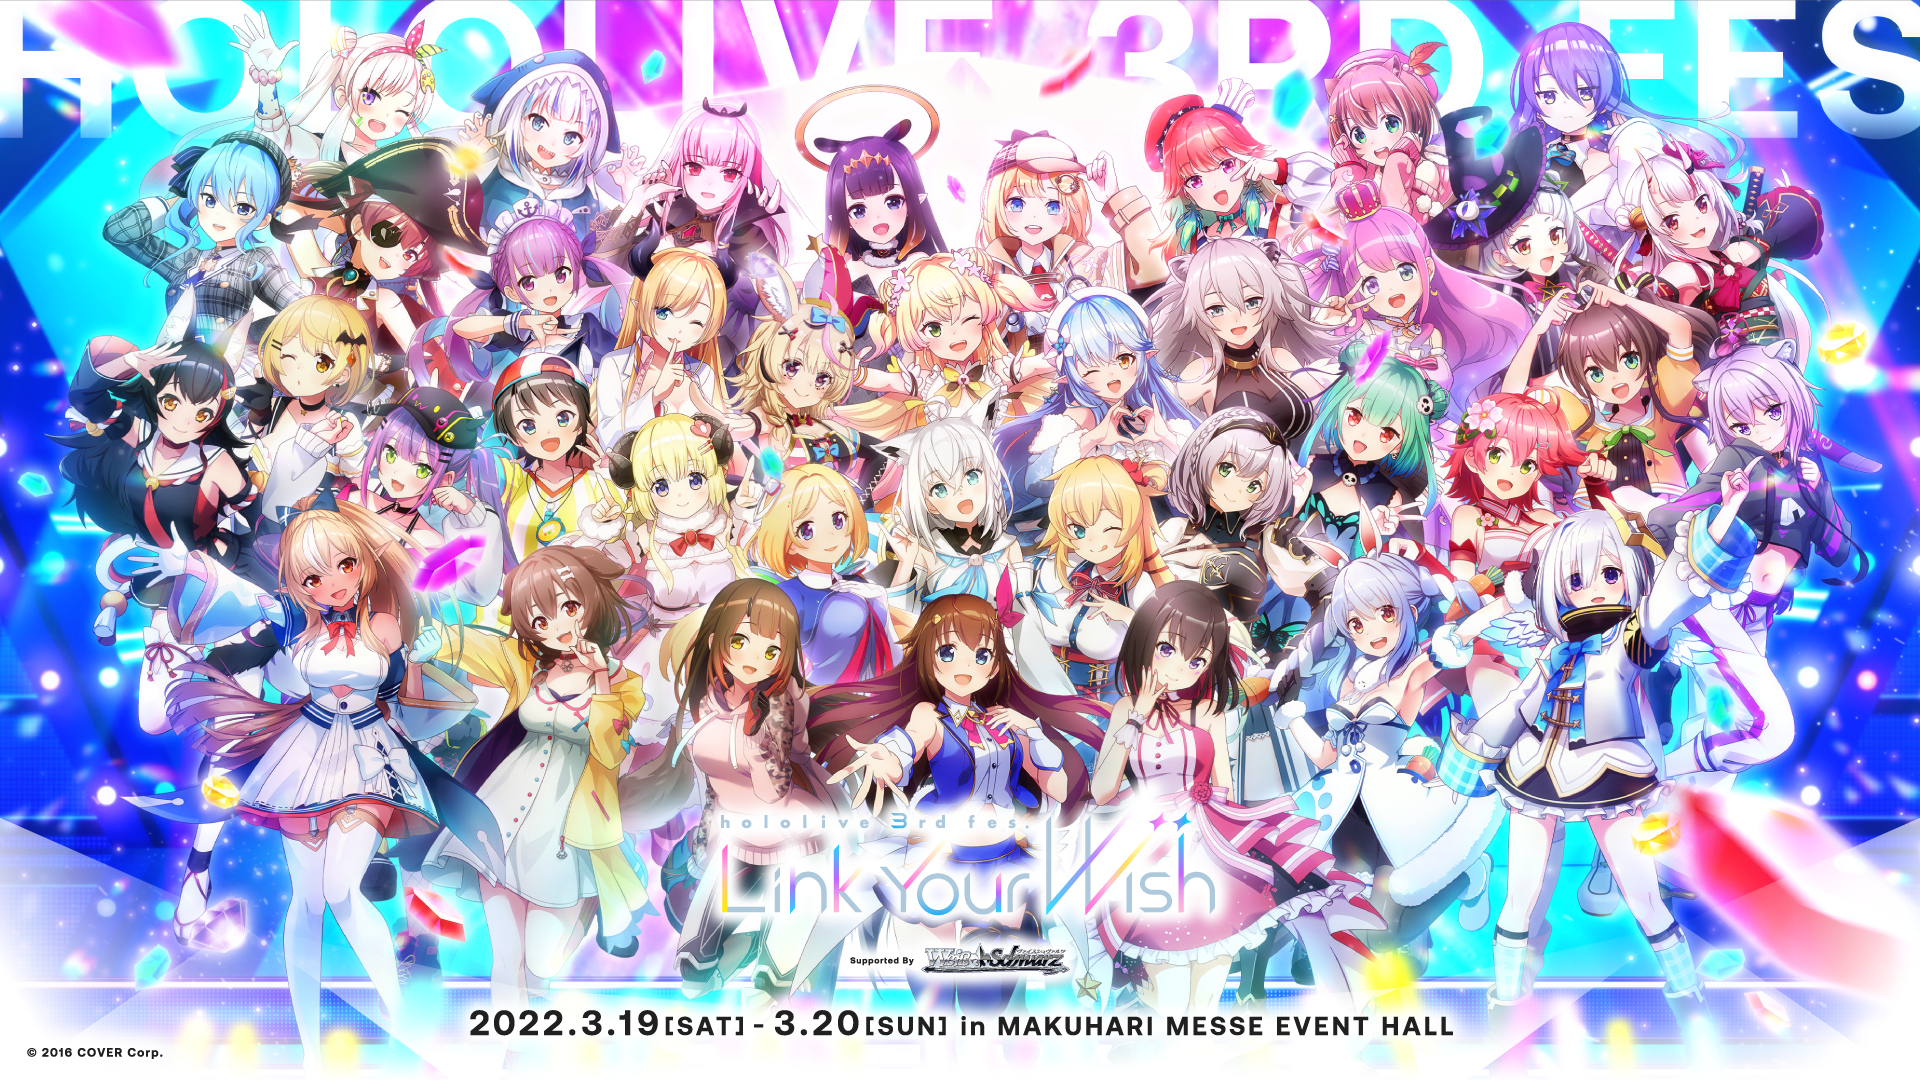 hololive 3rd fes. Link Your Wish Supported By ヴァイスシュヴァルツ | イベント情報 |  hololive（ホロライブ）公式サイト